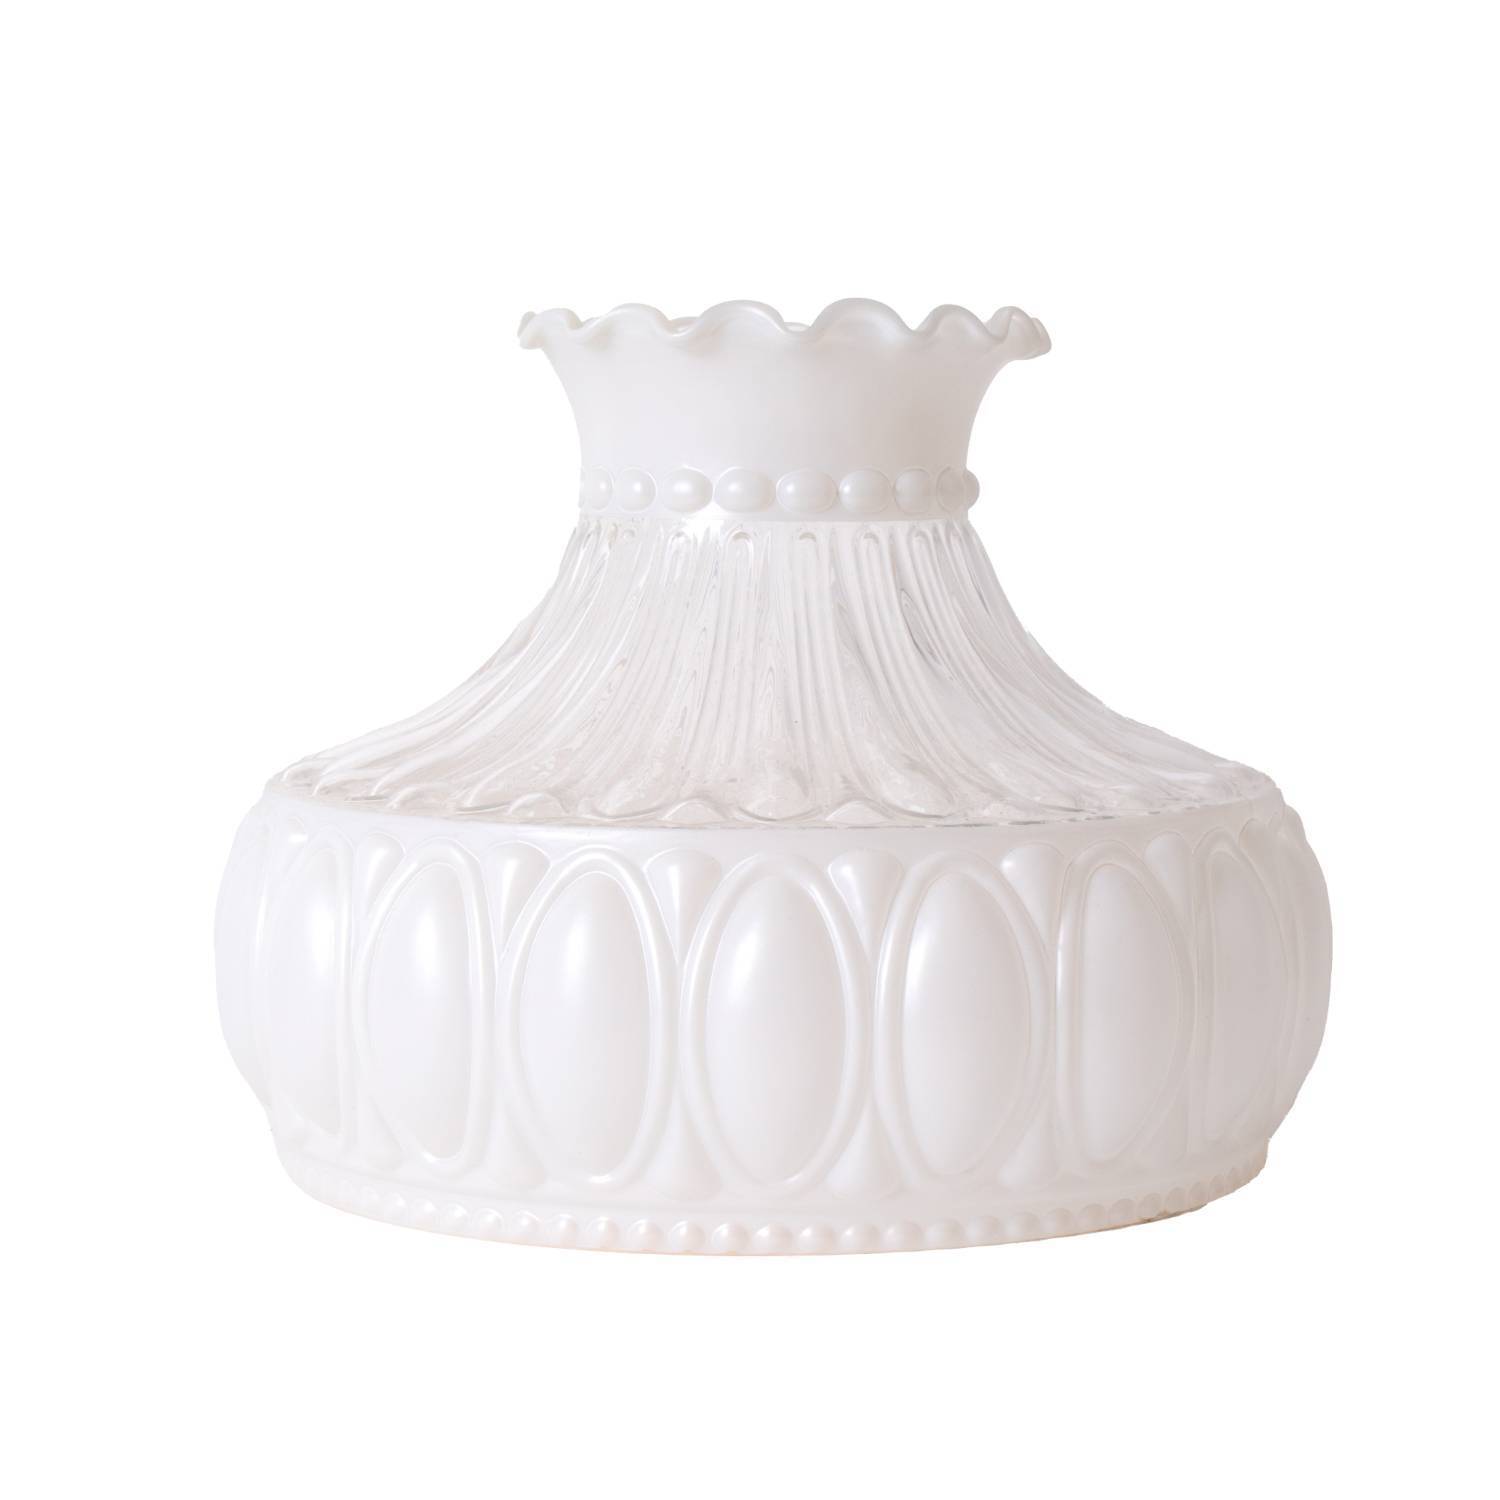 Aladdin Oil Lamp Glass Shade Fits 10 in Shade Ring Base, White Frosted Glass